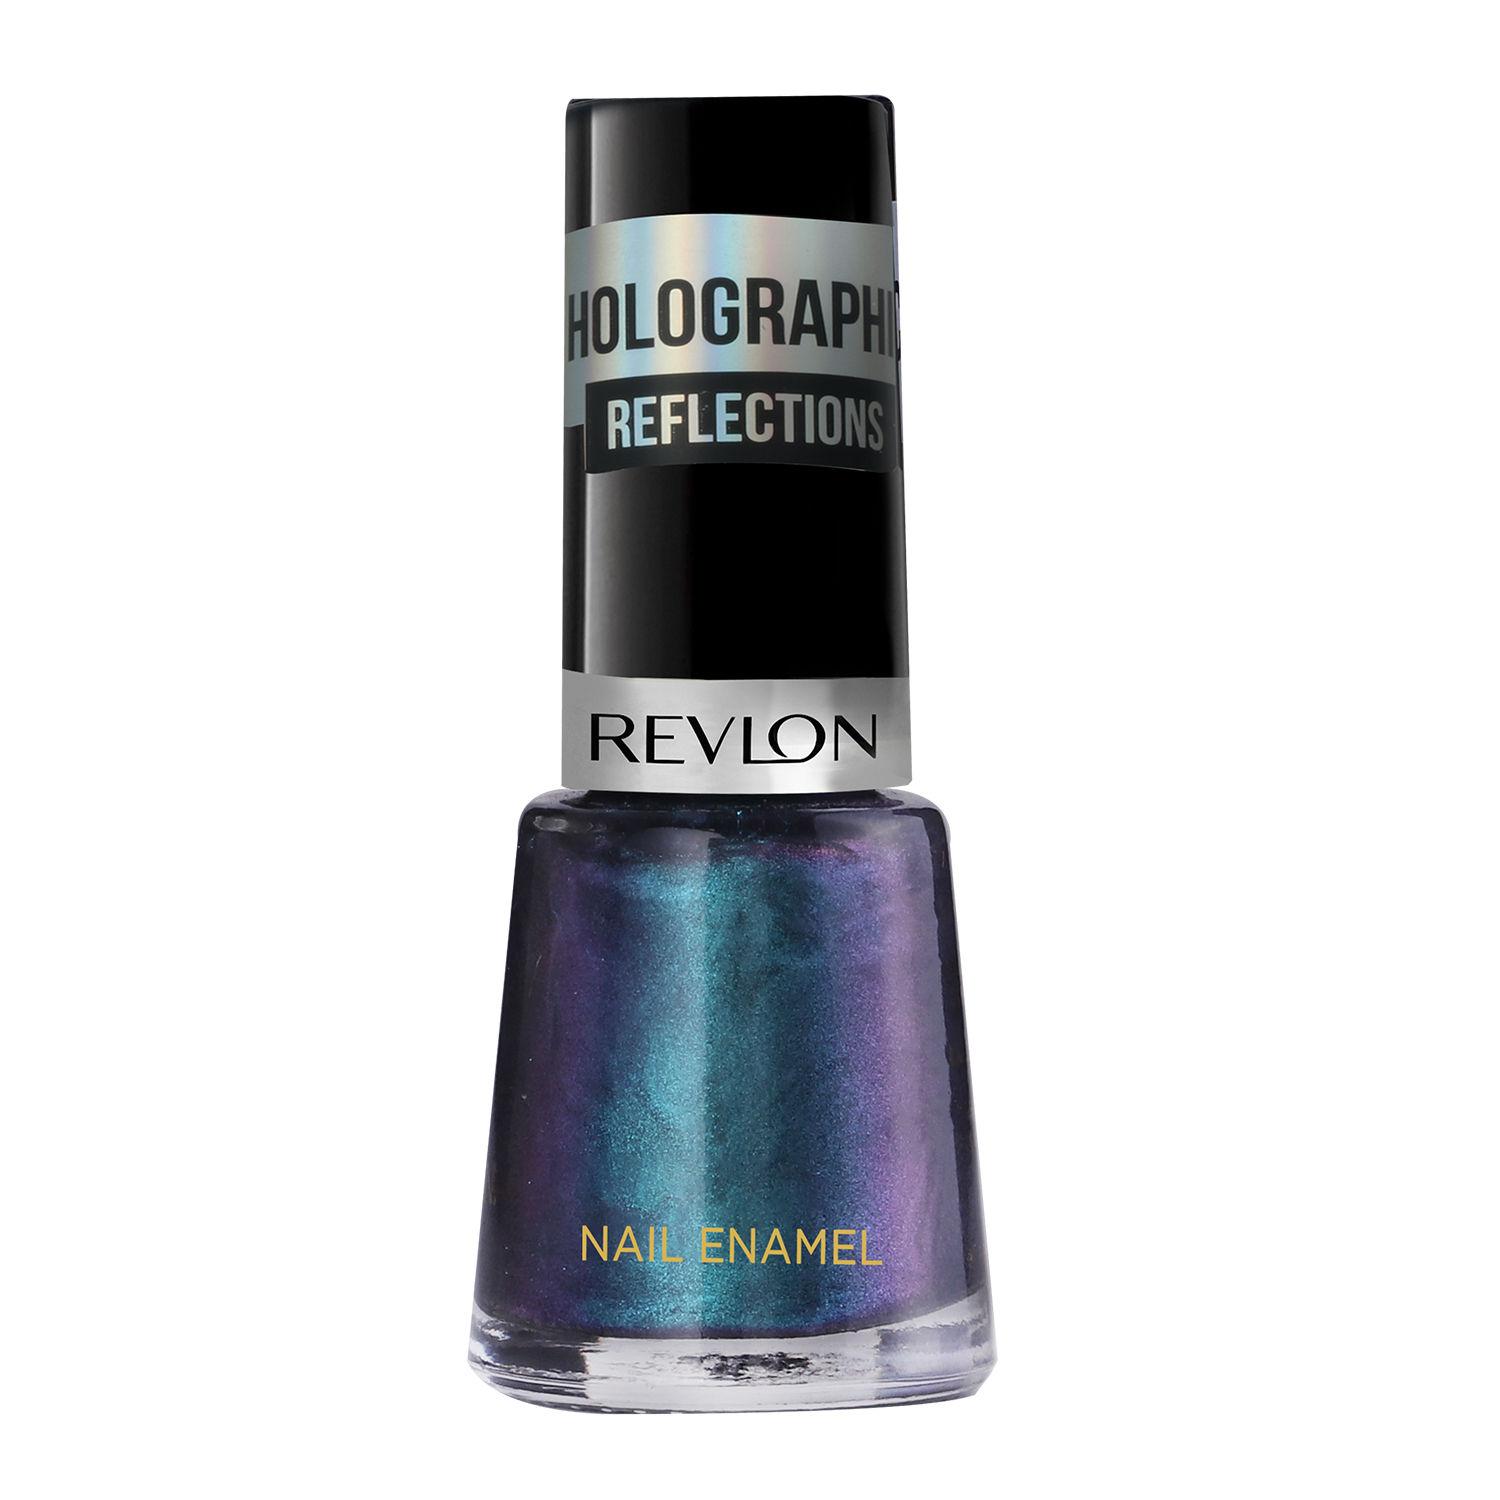 Buy Revlon Nail Enamel, Chip Resistant Nail Polish, Glossy Shine Finish, in  Red/Coral, 730 Valentine Red, 0.5 oz Online at Low Prices in India -  Amazon.in